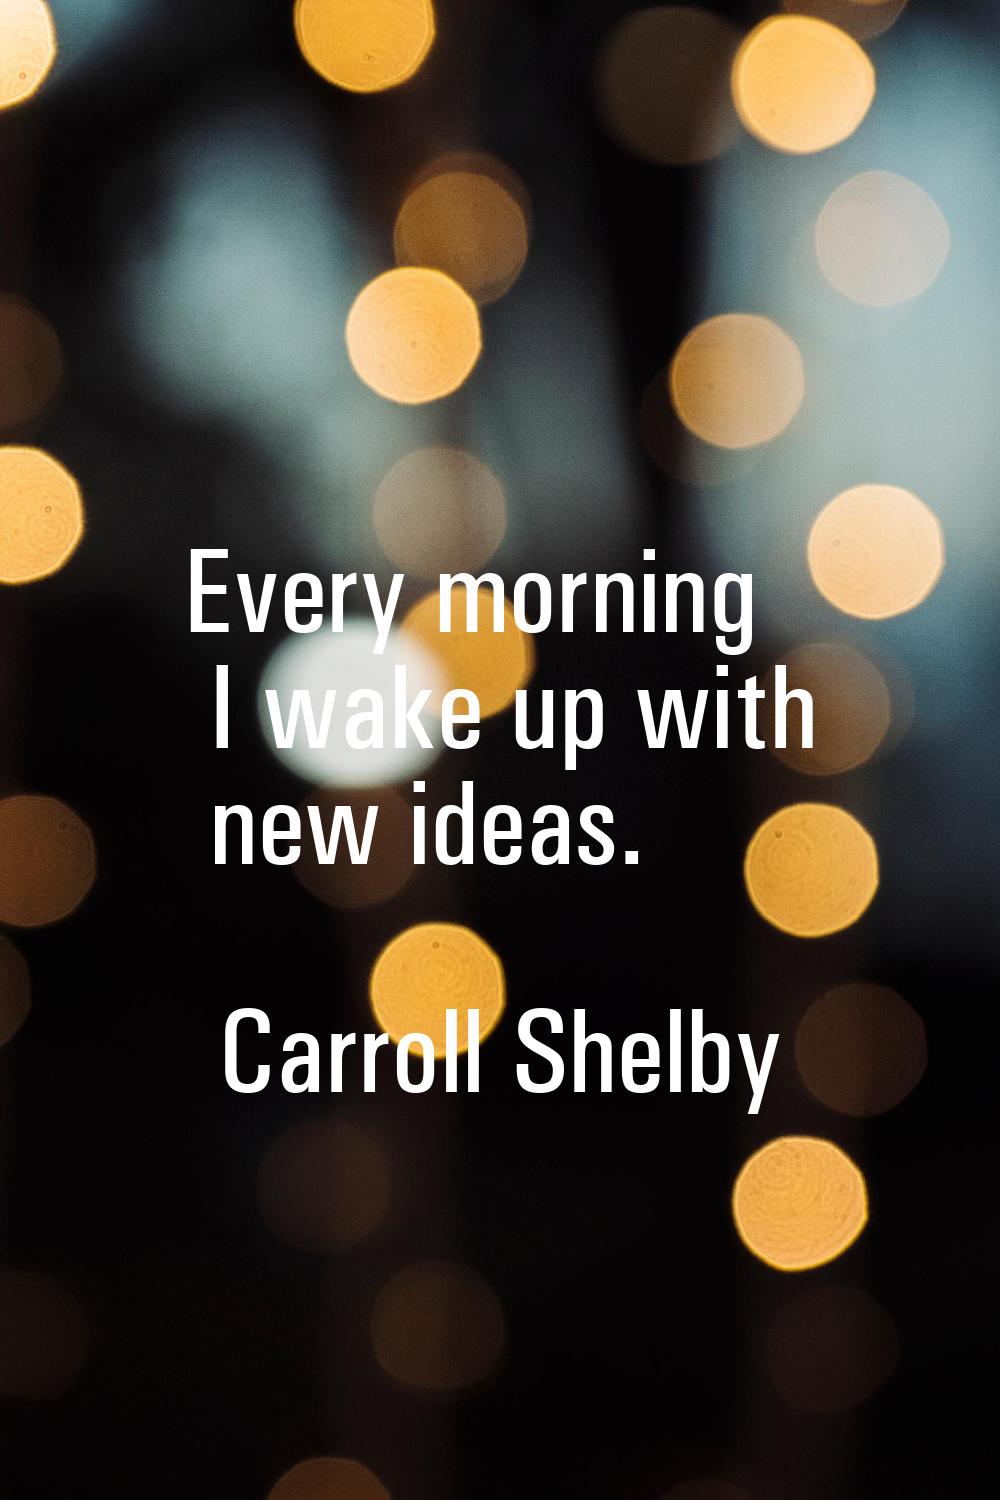 Every morning I wake up with new ideas.